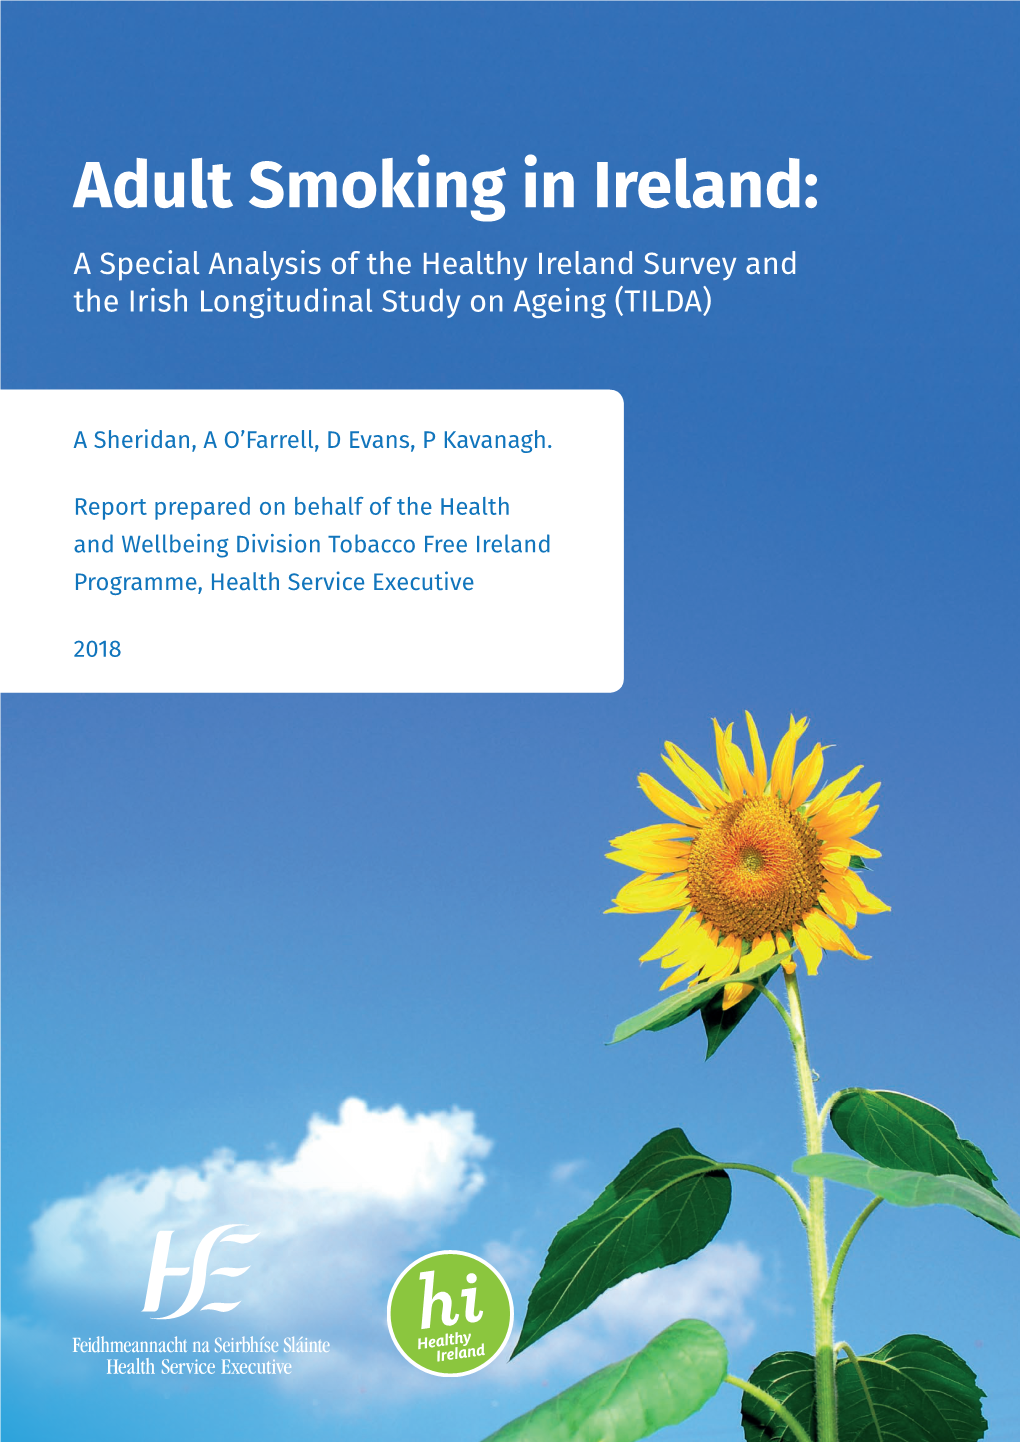 Adult Smoking in Ireland: a Special Analysis of the Healthy Ireland Survey and the Irish Longitudinal Study on Ageing (TILDA)